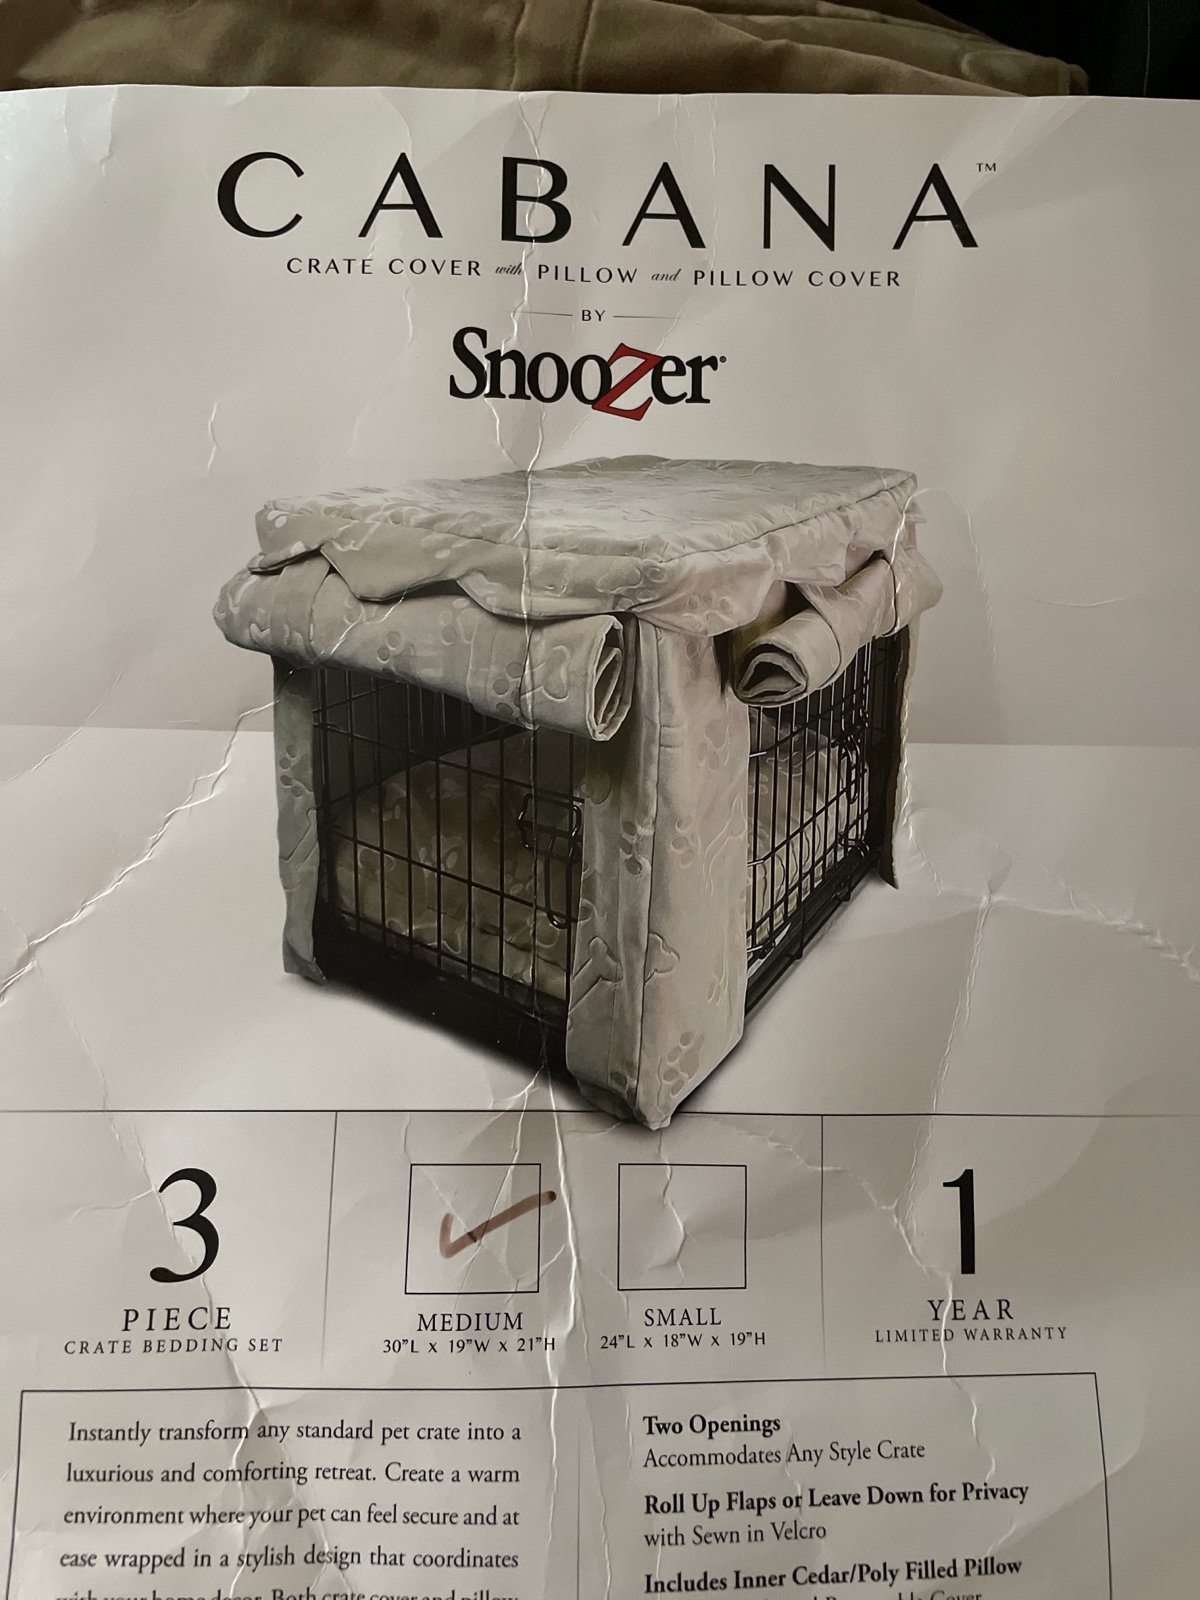 Snoozer crate cover N5TuRHe8x